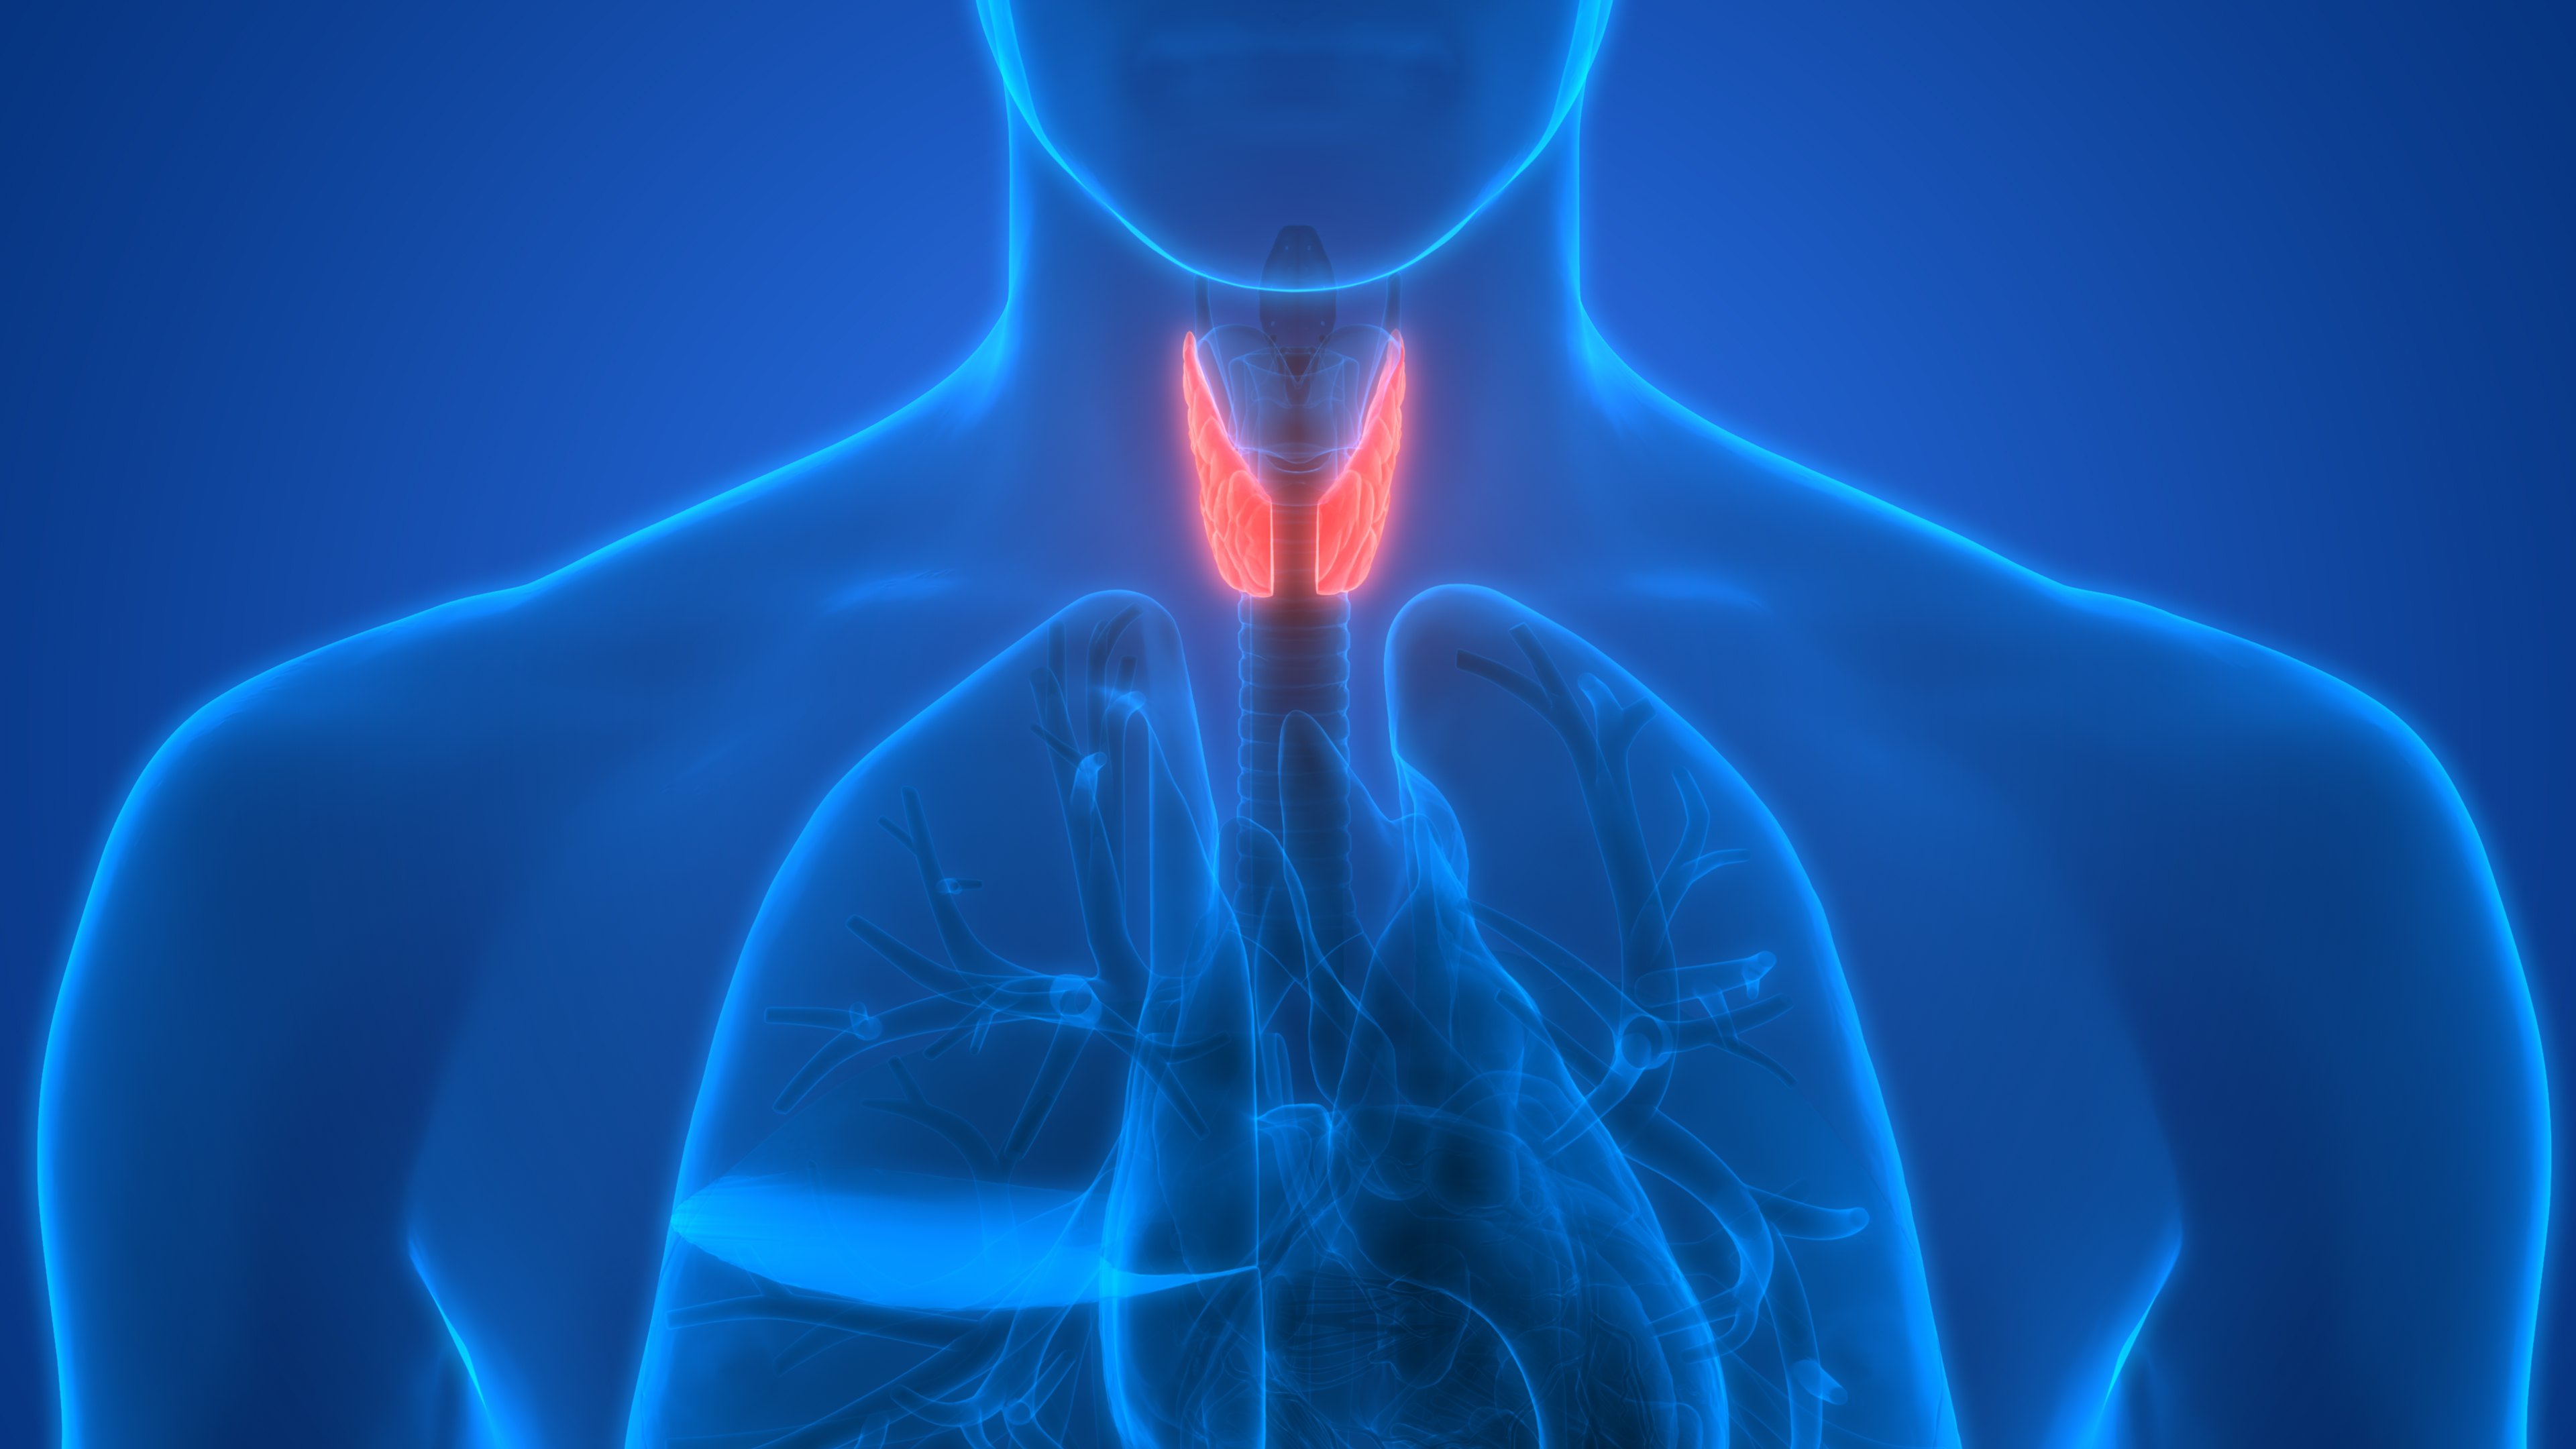 Treating the hyperthyroid patient with radioiodine